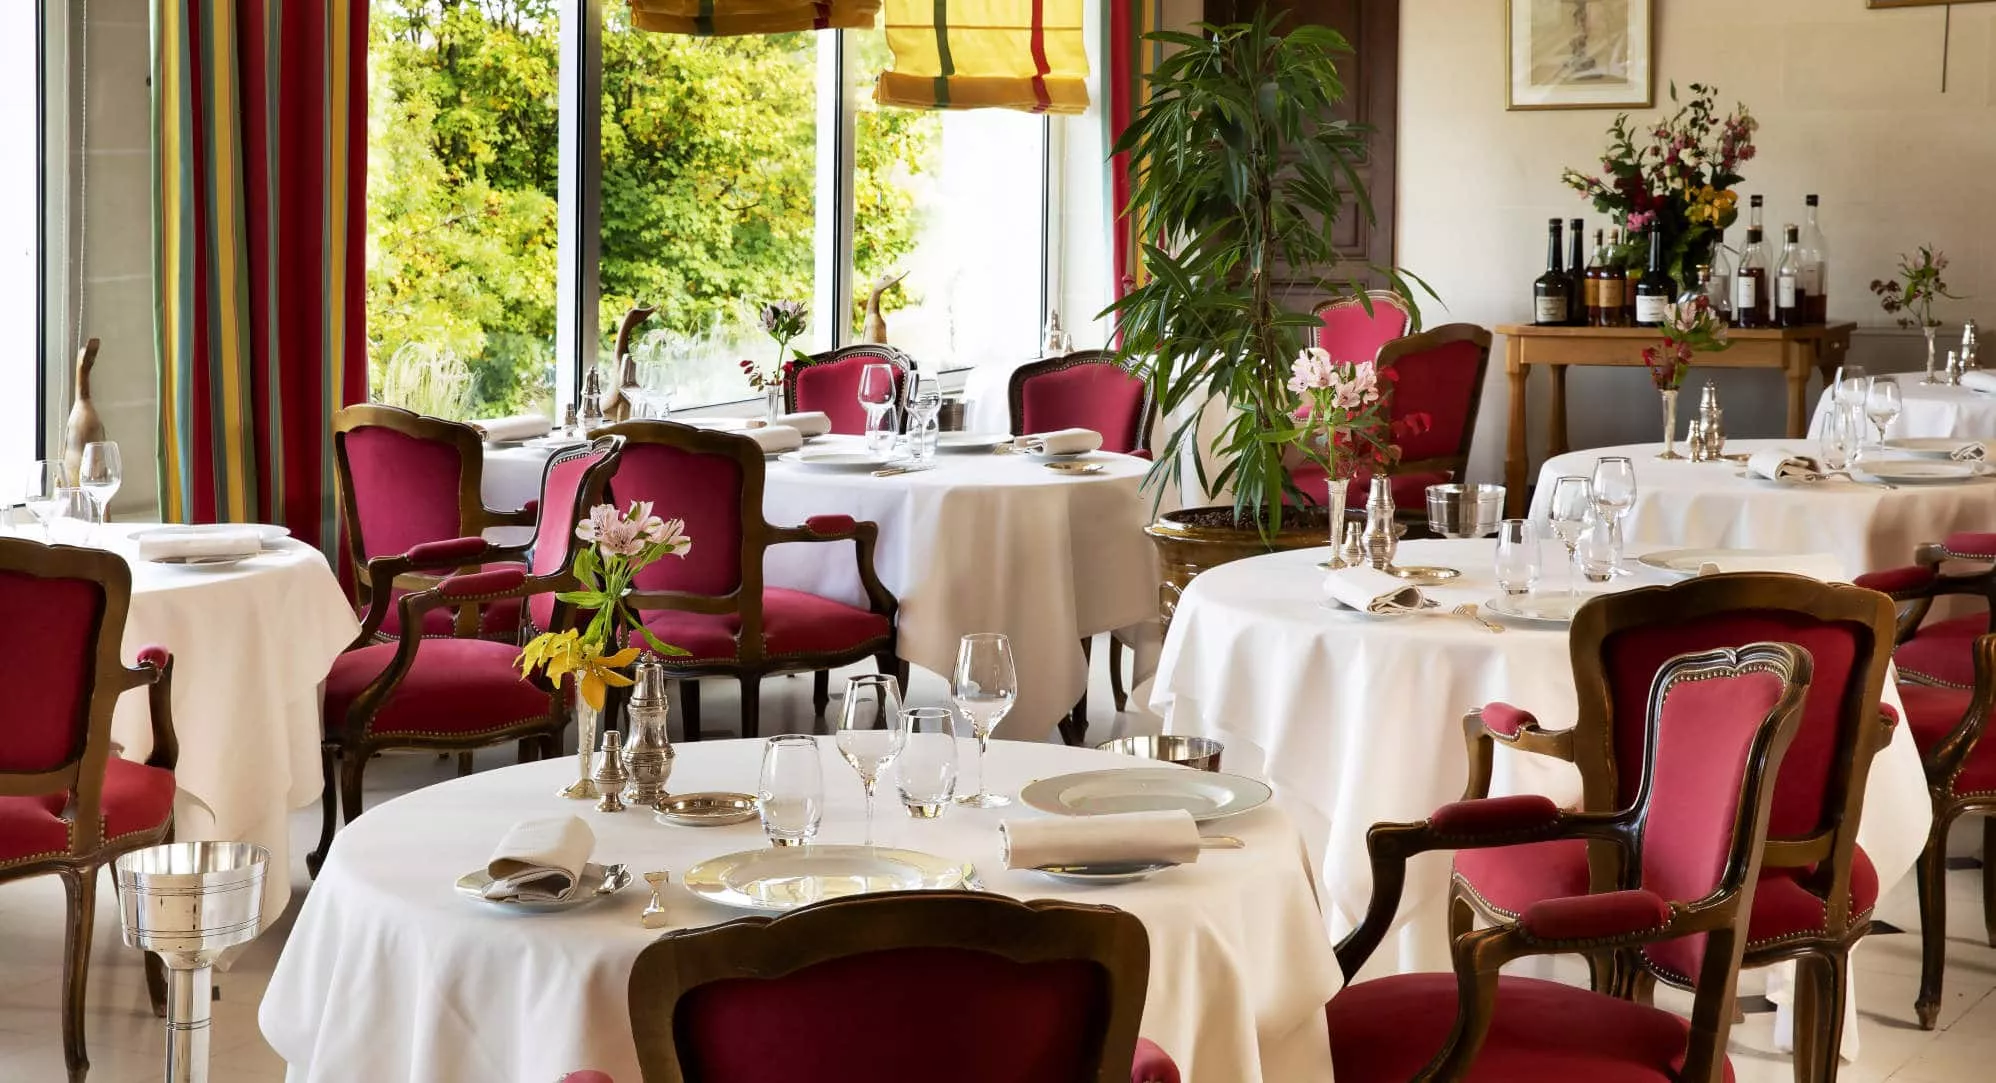 L'Ambroisie in France, Europe | Restaurants - Rated 3.7